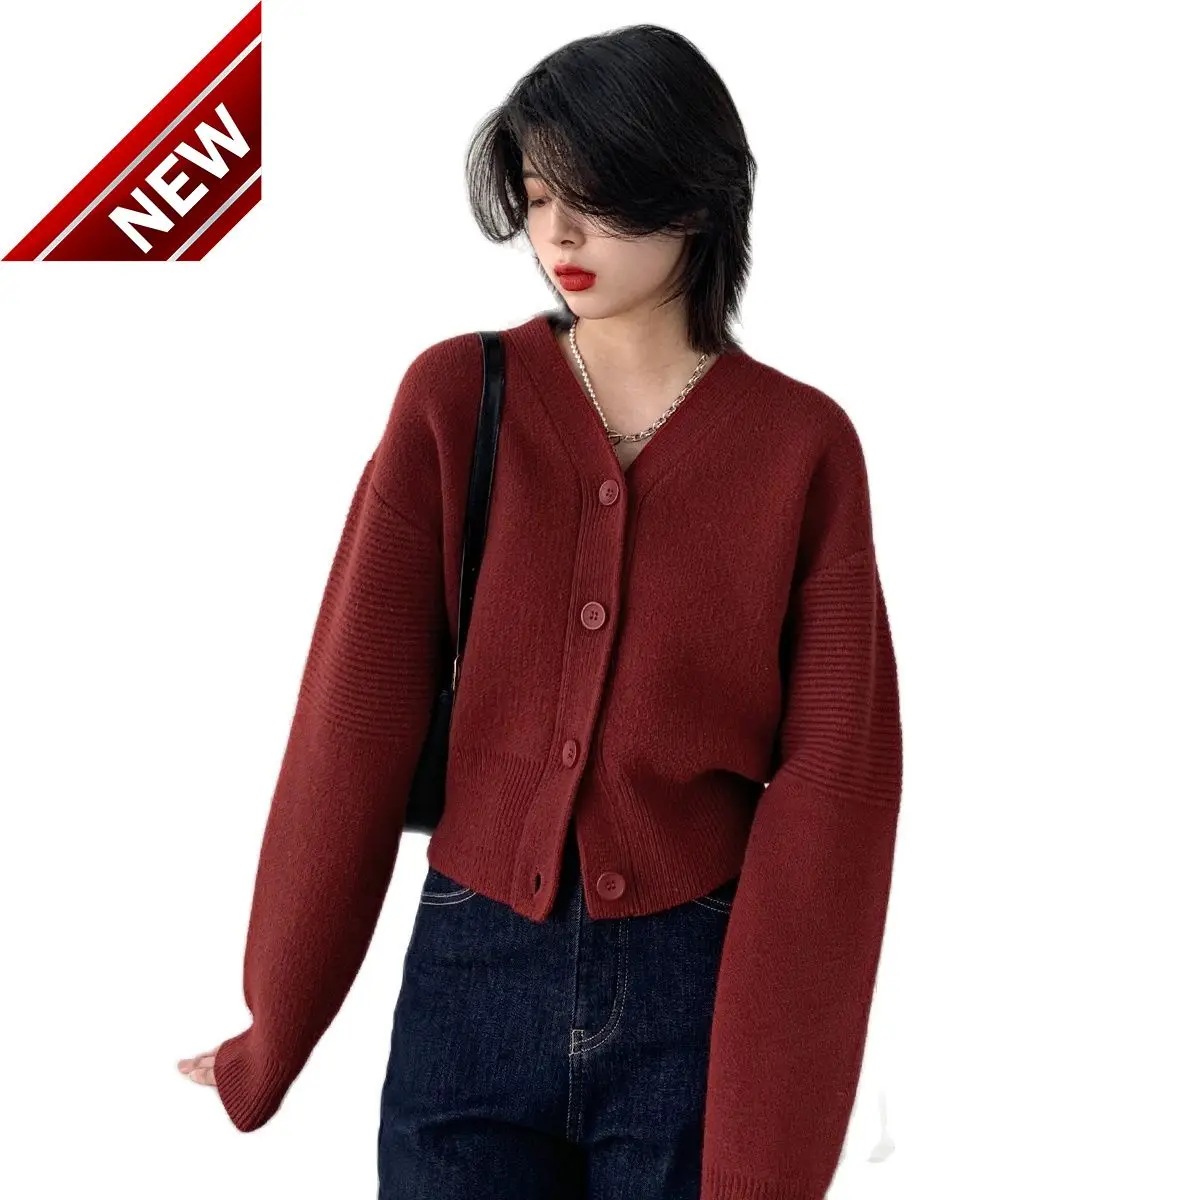 

Women's Korean Sweater Fashion Wine Red Contracted Short V Collar Long Sleeve Wool Cardigan for Women Top Autumn Winter